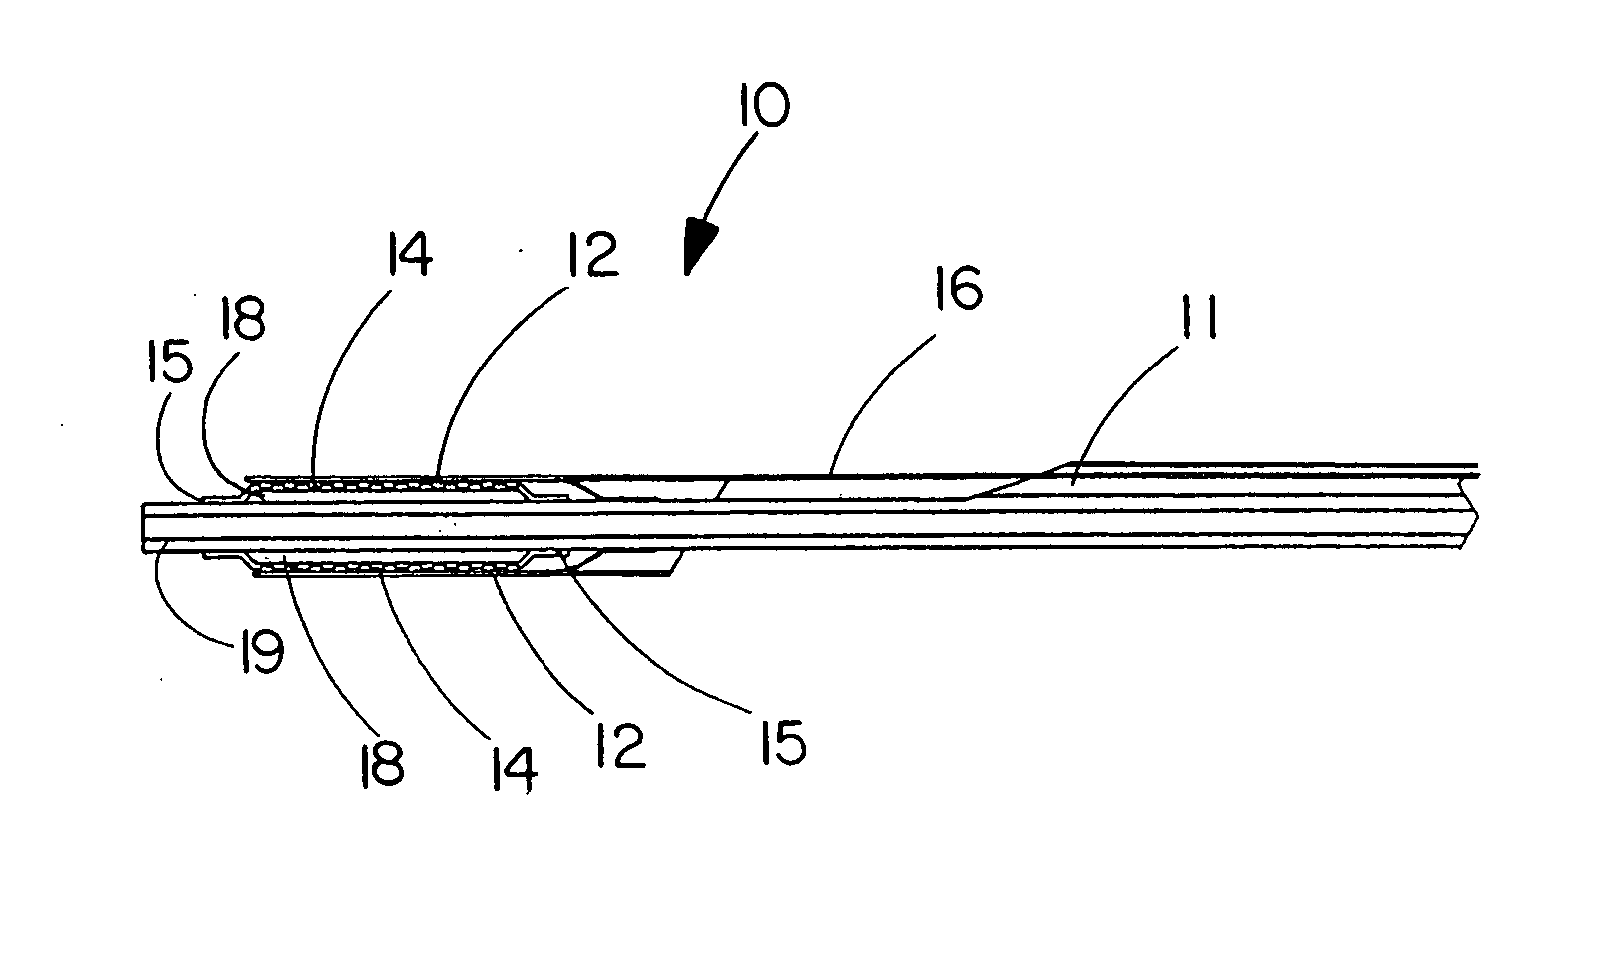 Deployment system for an expandable device